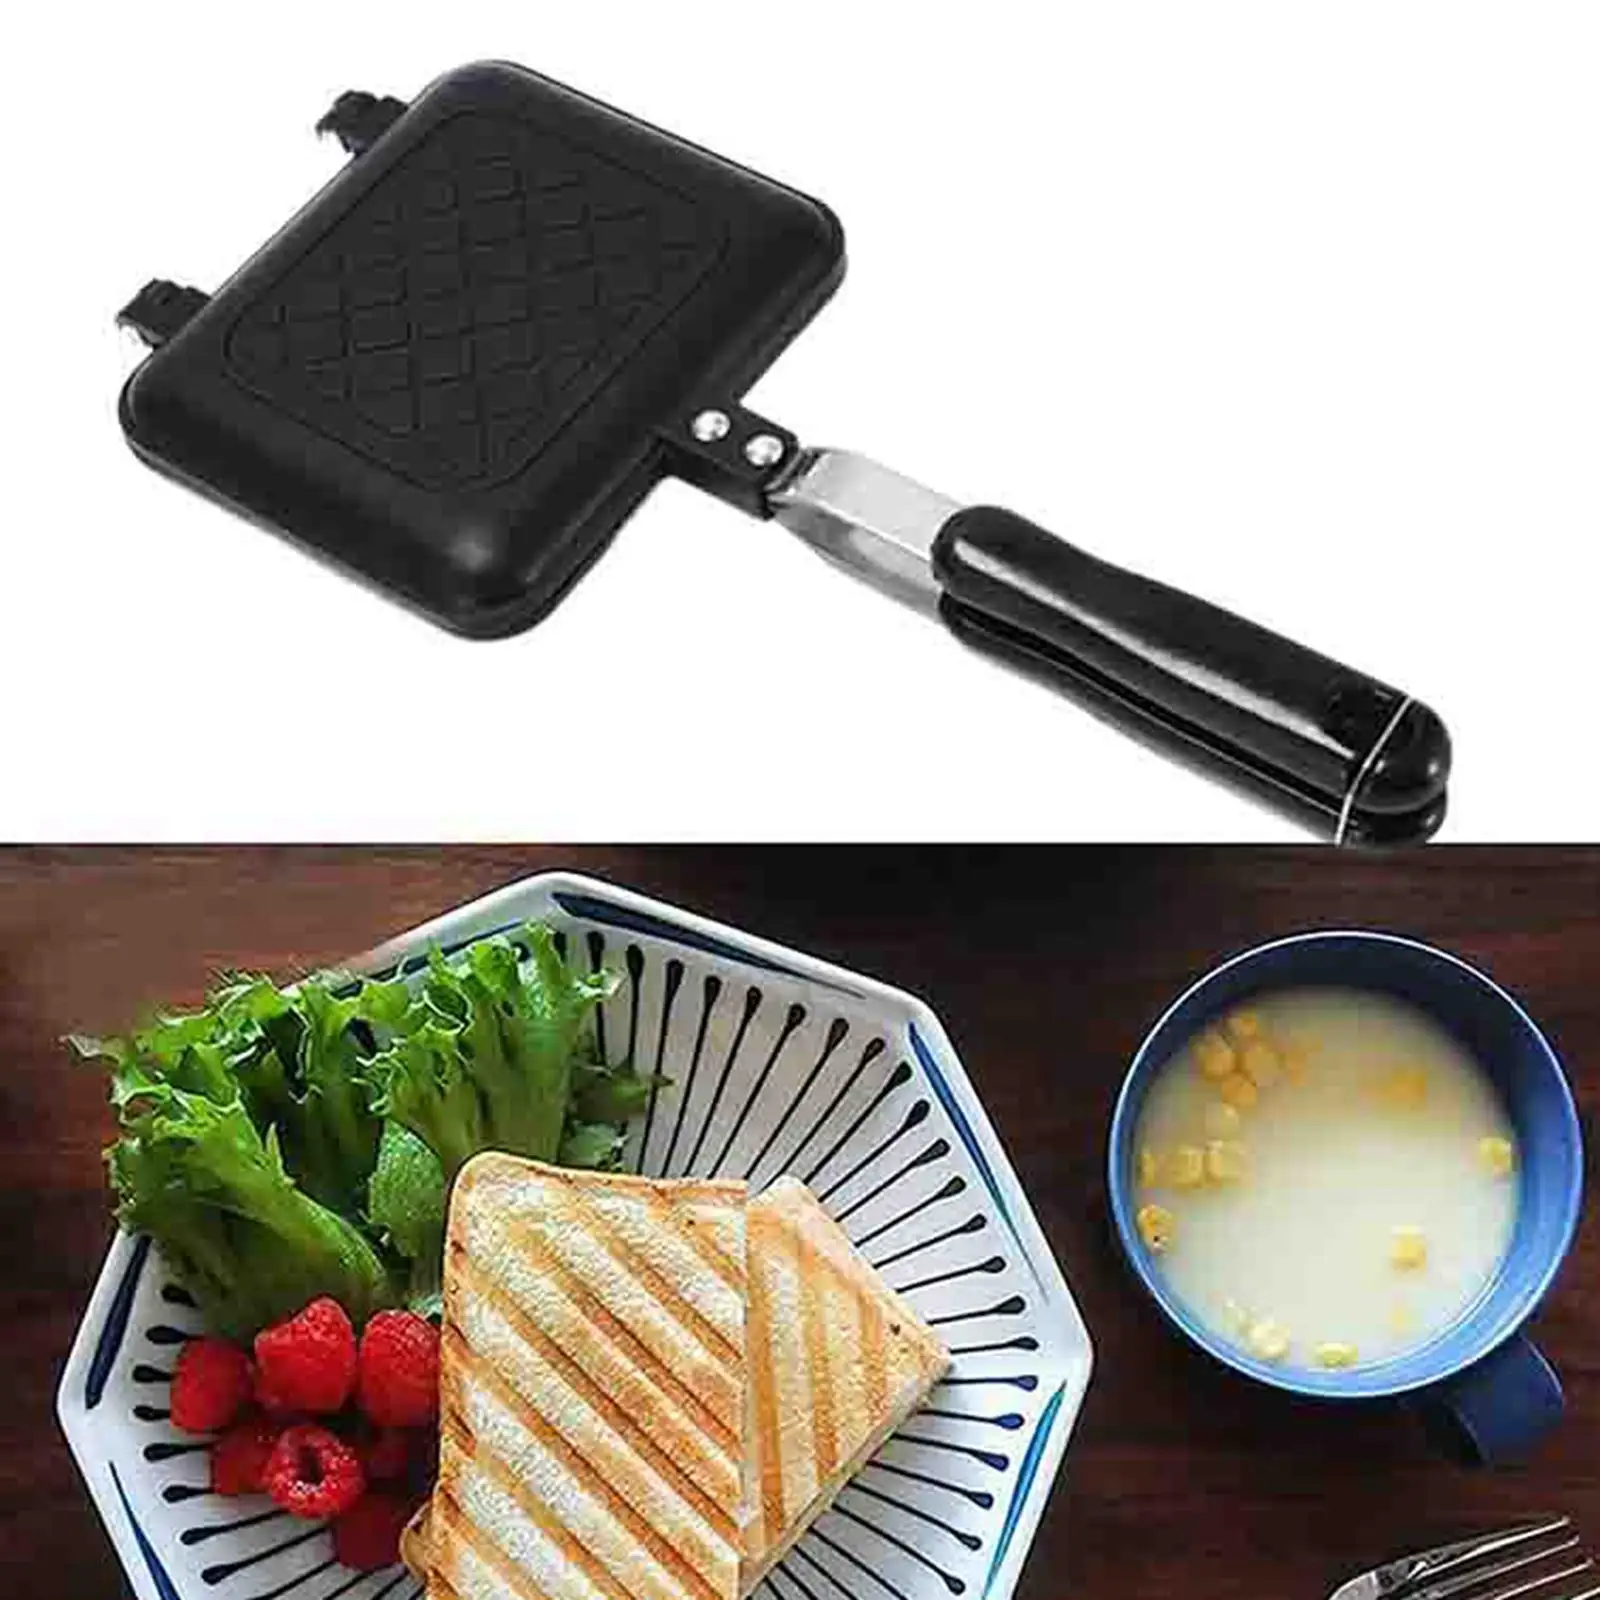 Dual Sided Heating Cooking Pan Long Handle Nonstick Skillet Cake Maker Pan Rectangle Non Stick for Electric Ceramic Stove